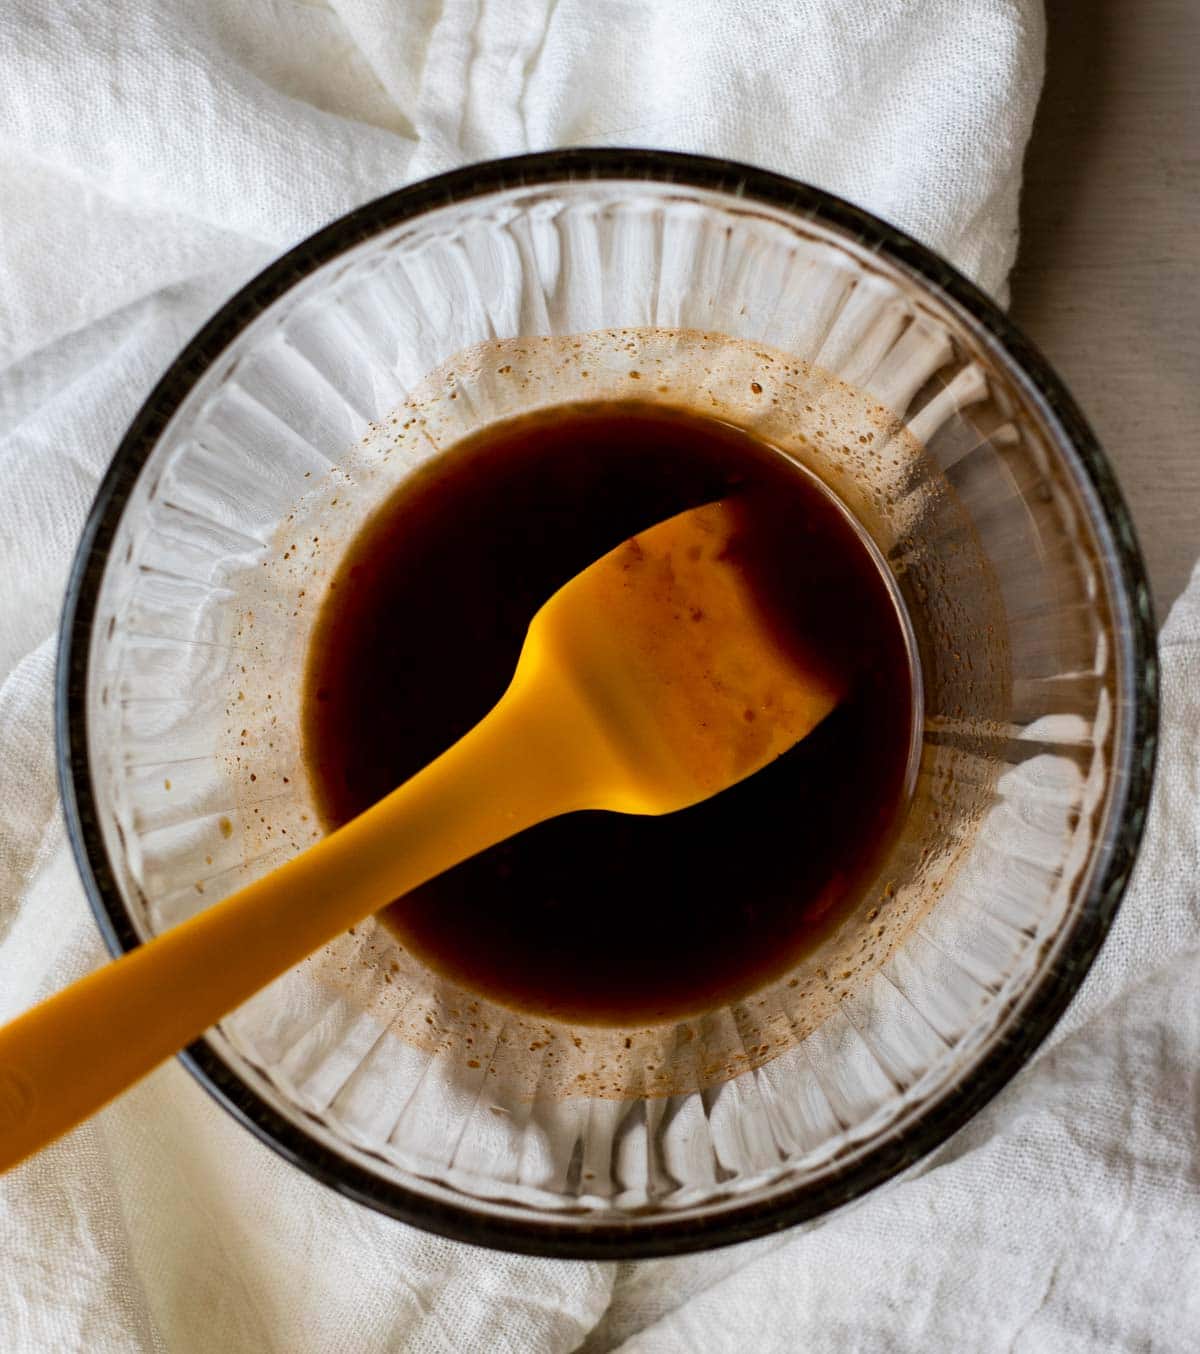 Hunan sauce in a glass bowl with a spatula.